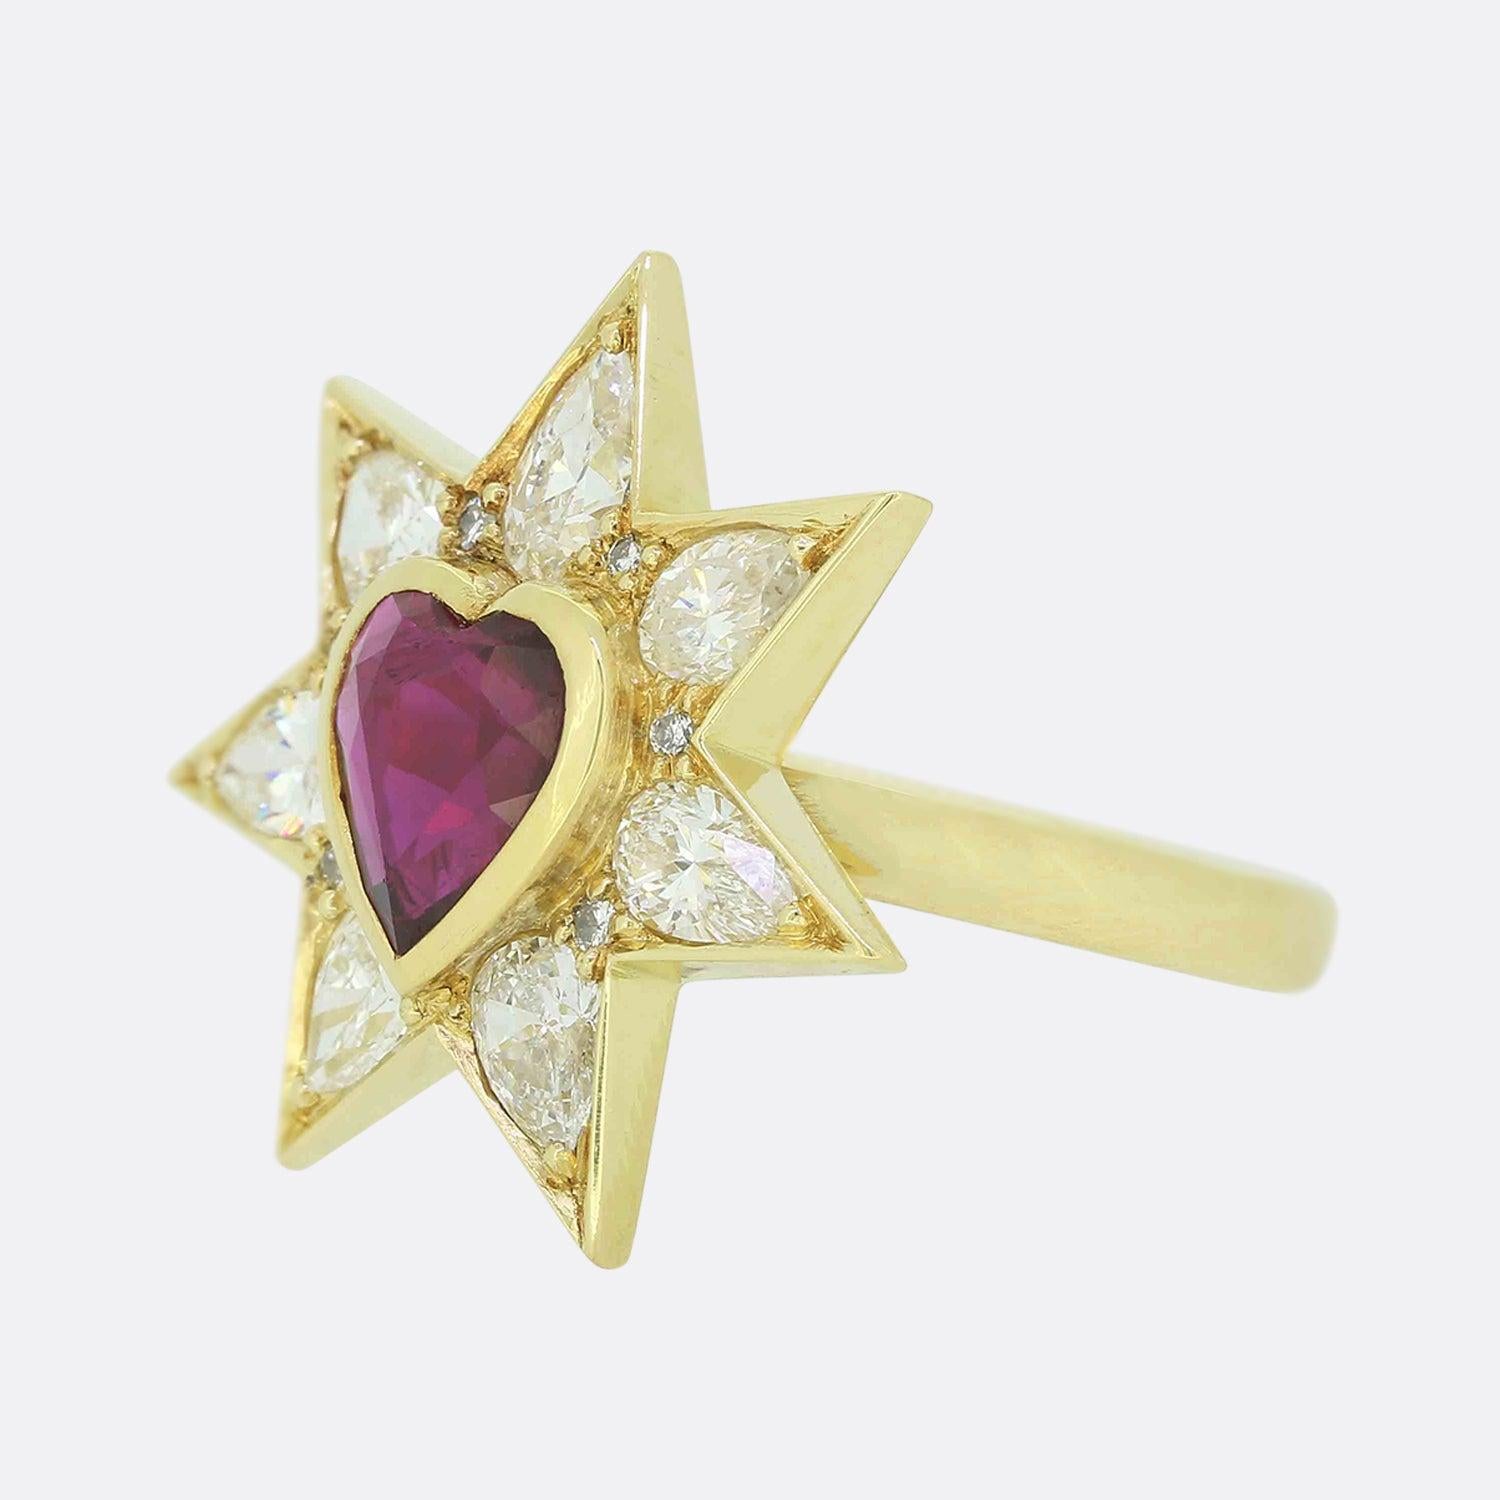 Here we have a stunning ruby and diamond ring. The head of this piece has been expertly crafted from 18ct yellow gold into a seven pointed star with each point playing host to a sizeable pear cut diamond and a smaller round brilliant stone nestled